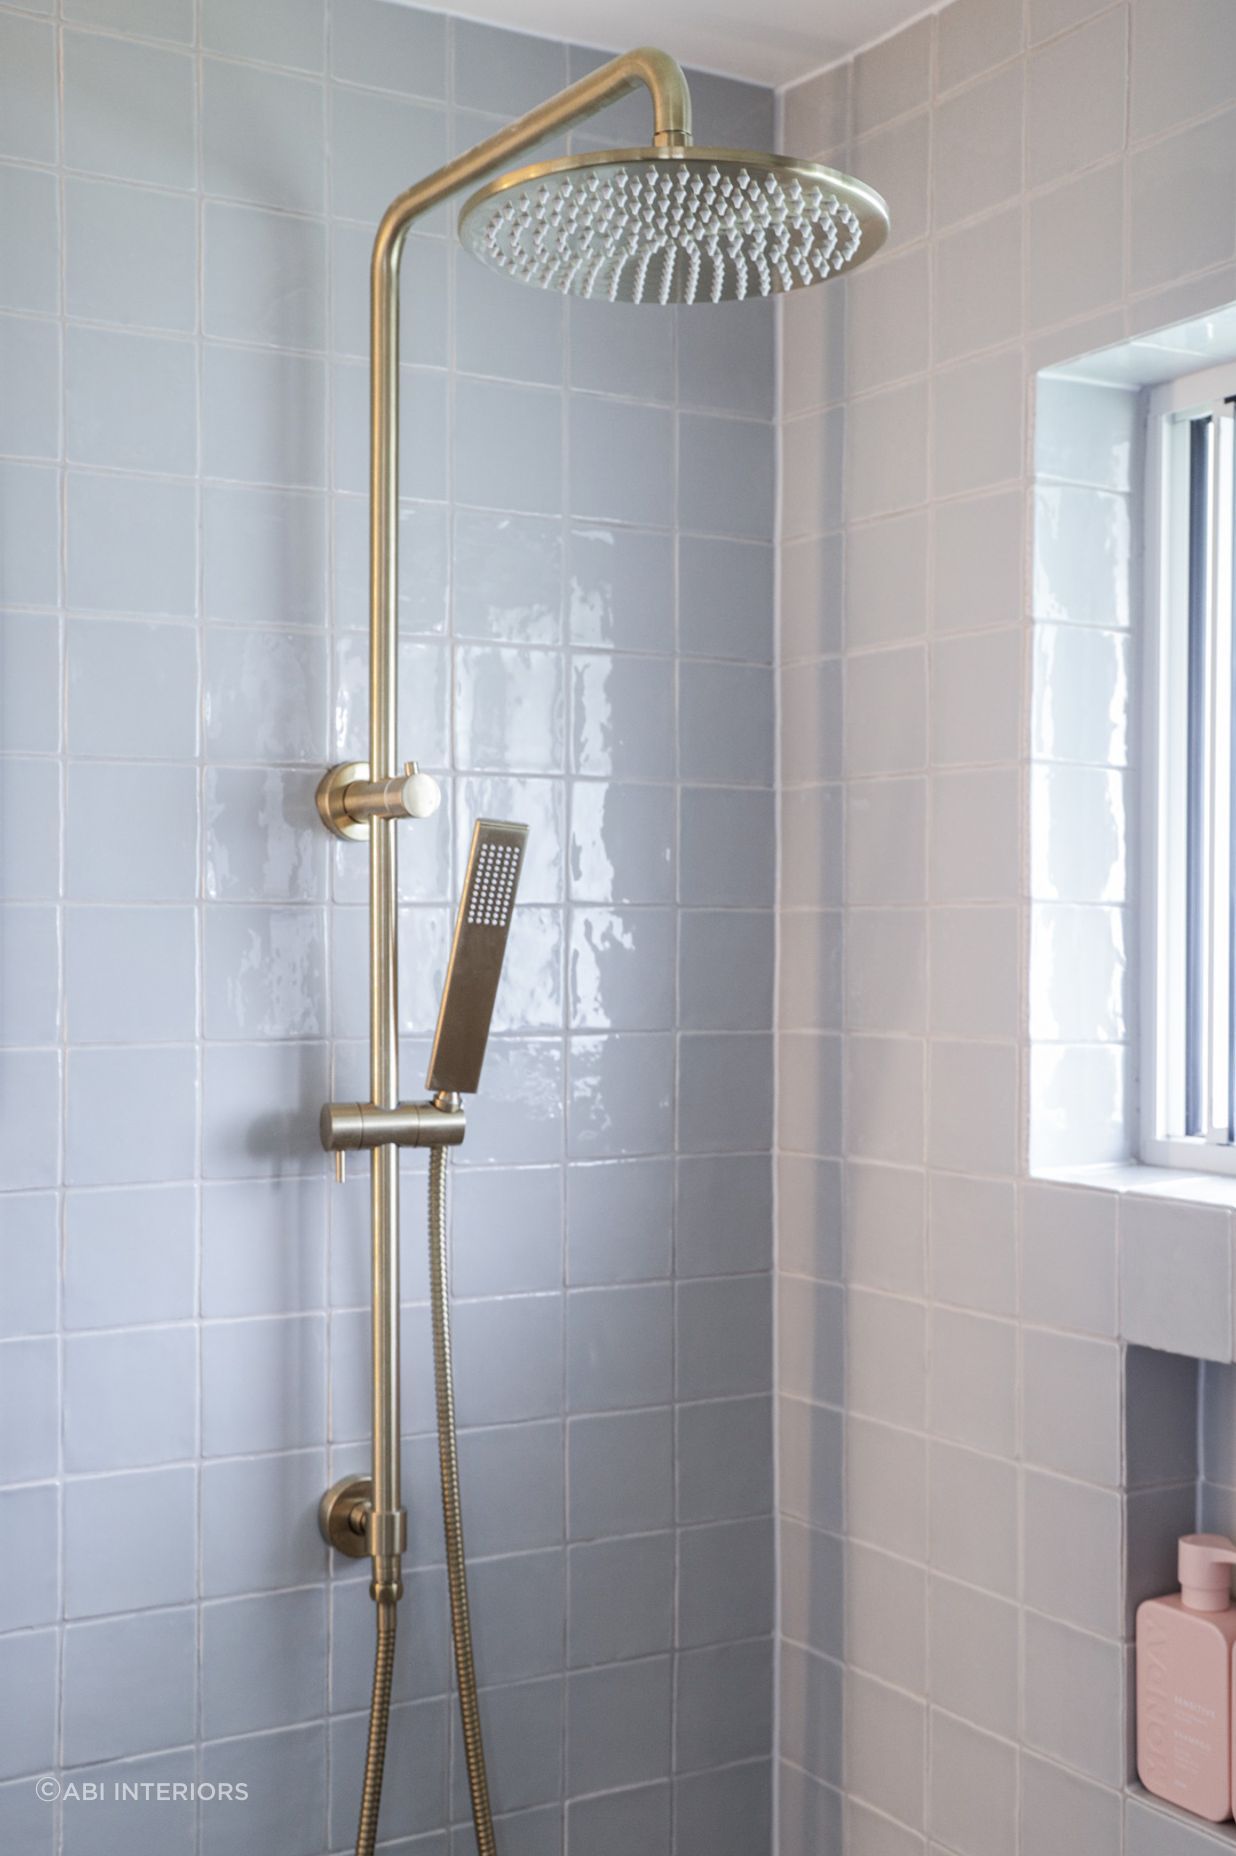 Featured product: ABI Finley Shower Rail Set.